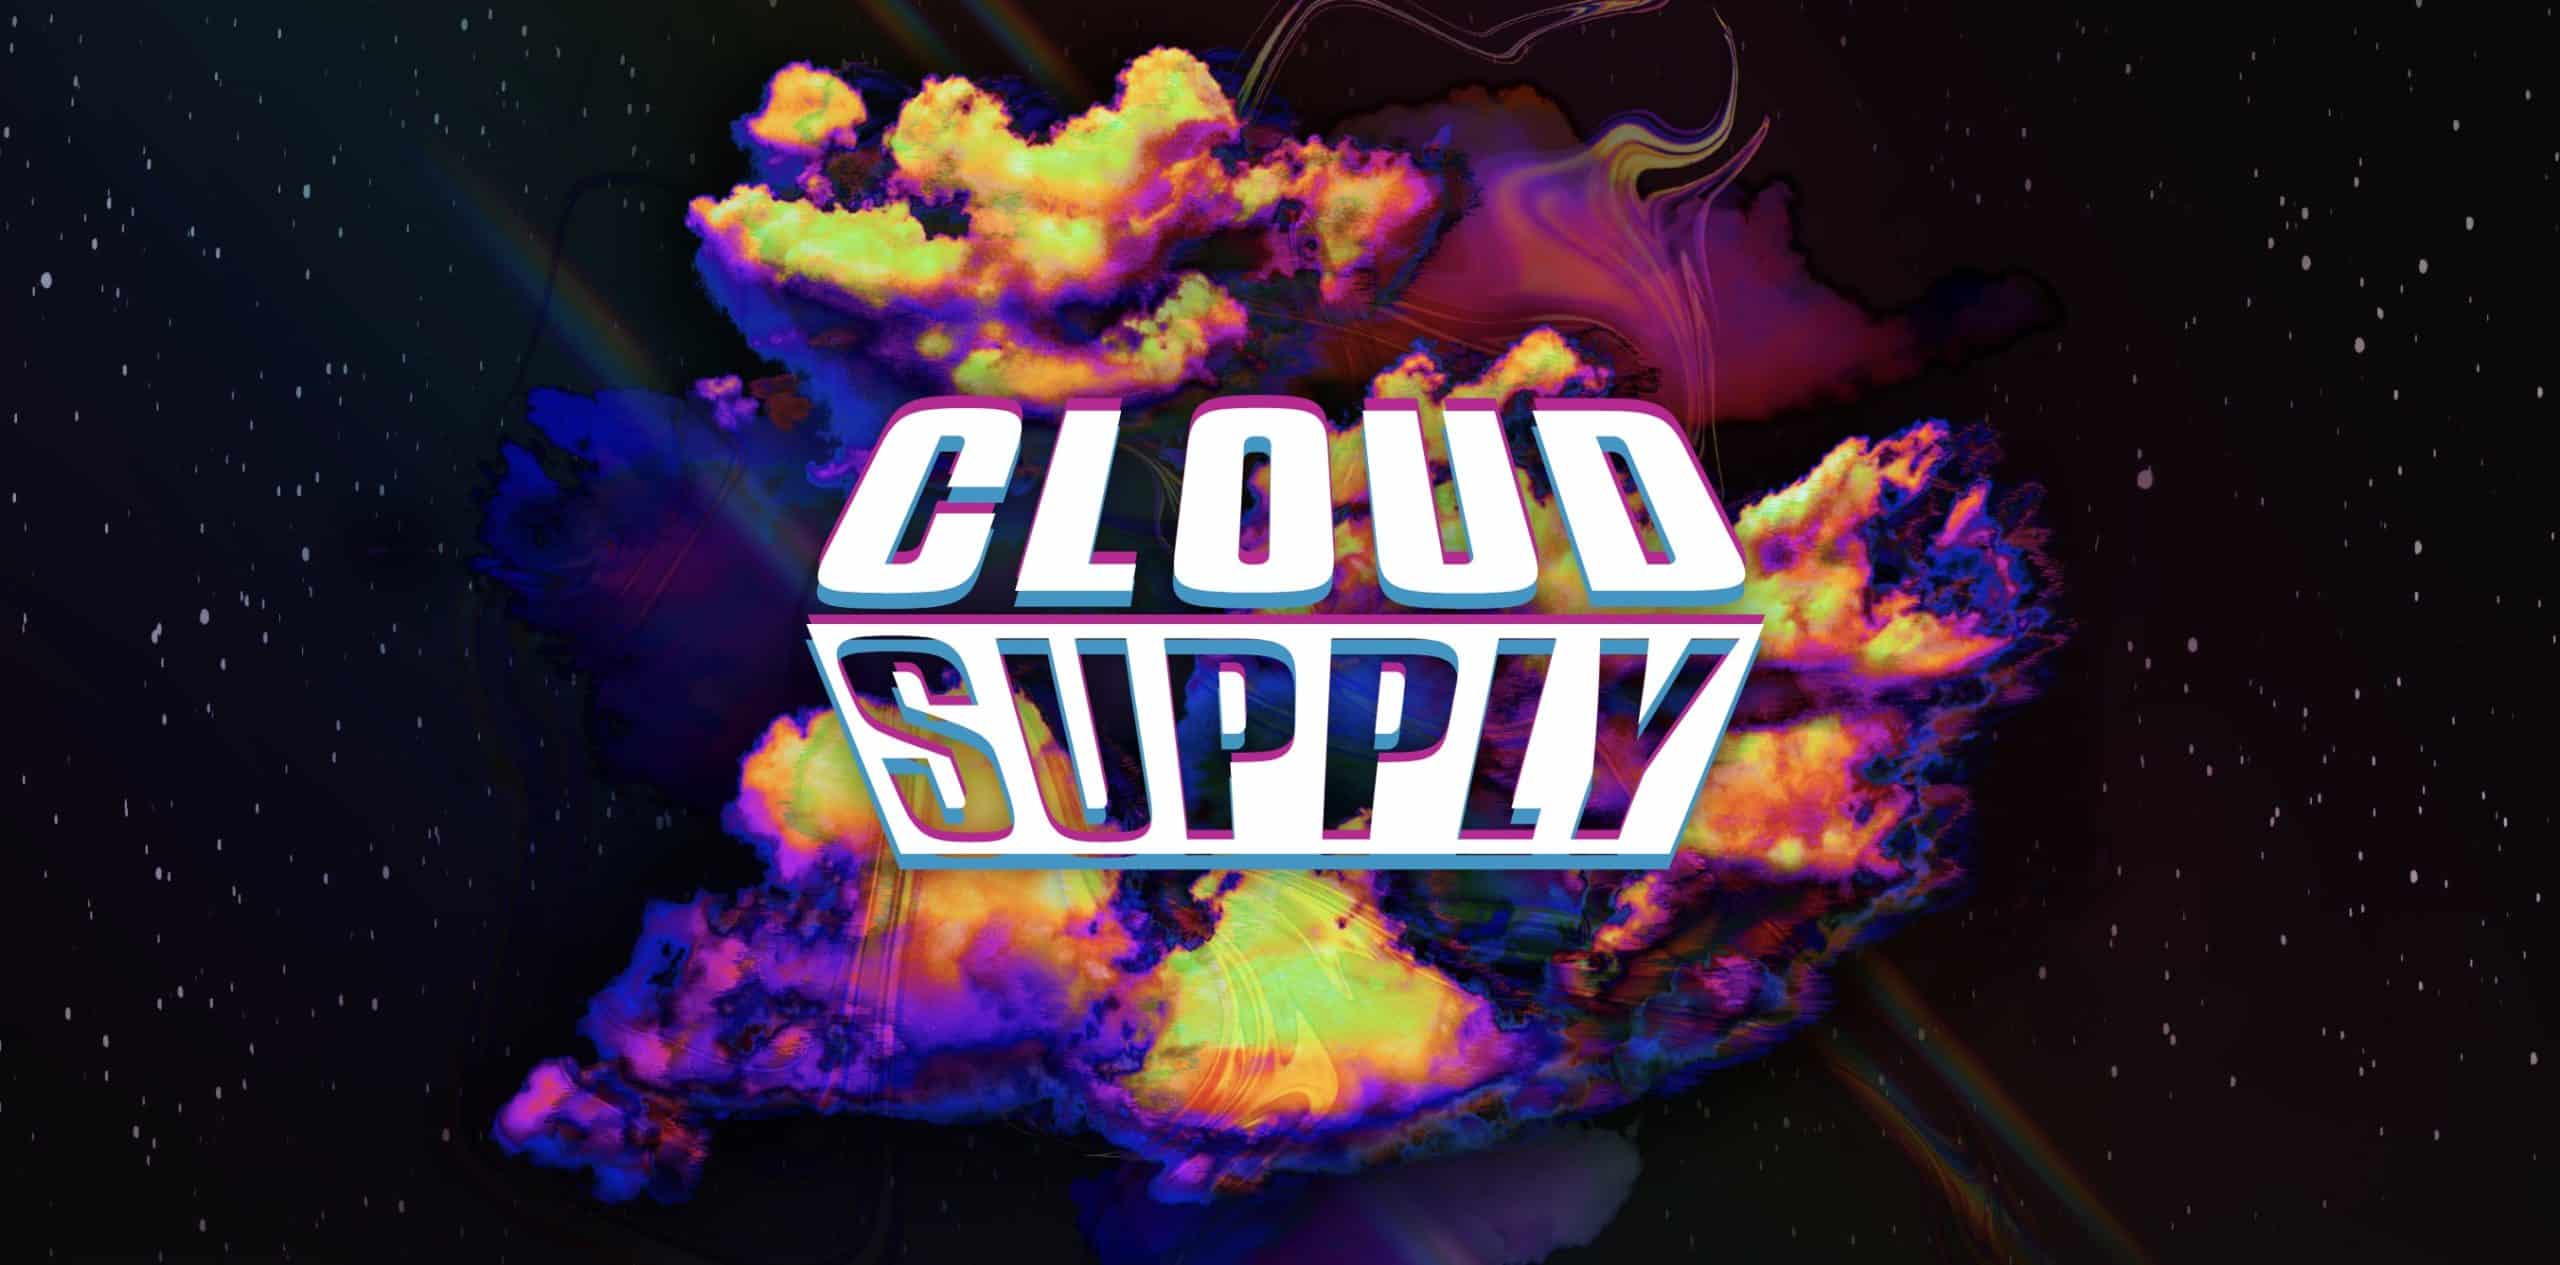 NATIVE INSTRUMENTS Launches CLOUD SUPPLY | Nebular trap melodics